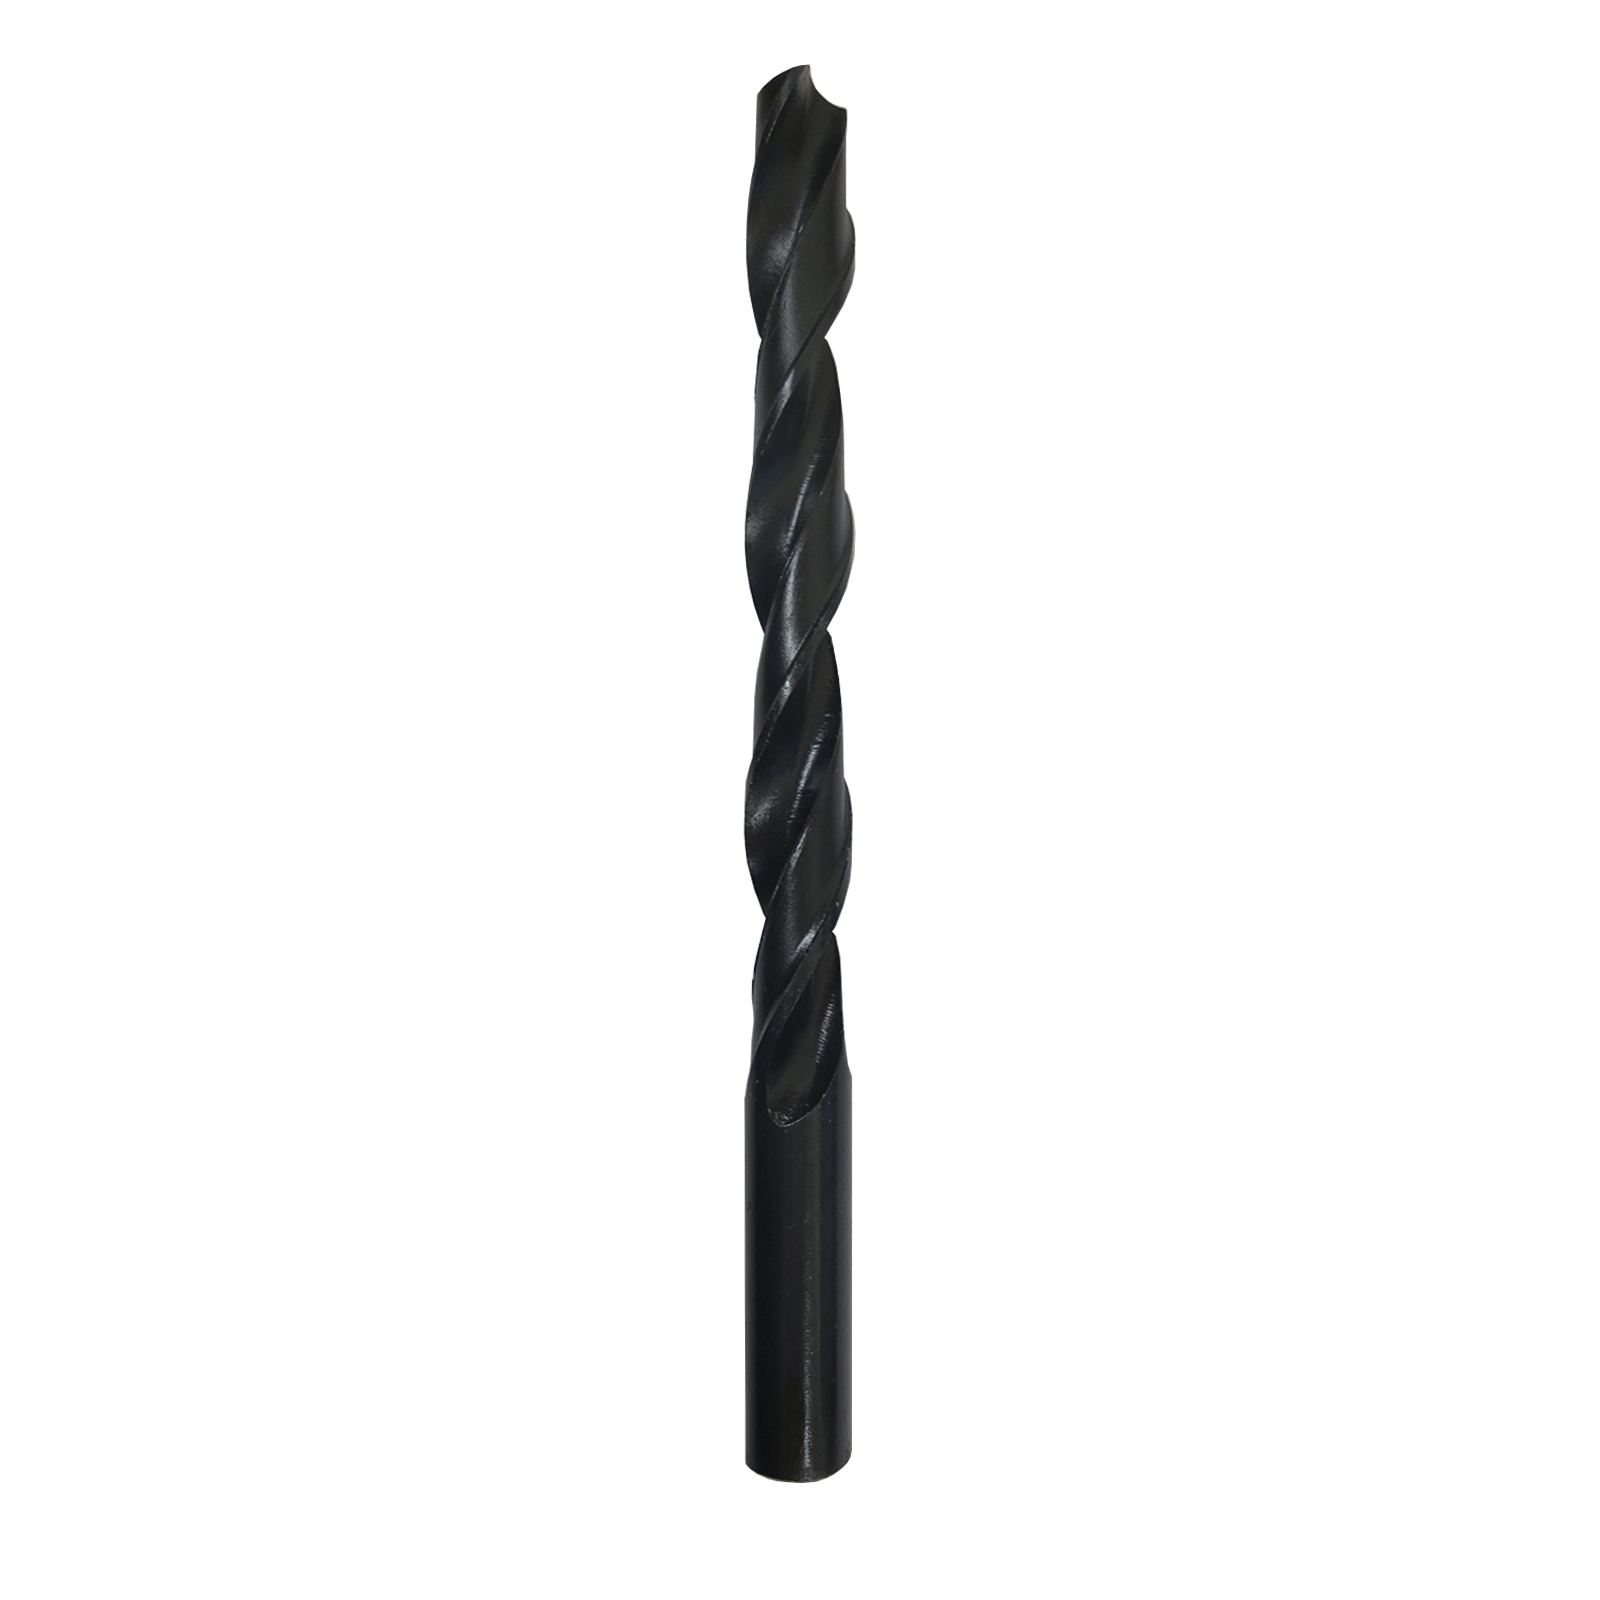 Gyros 45-42033 Premium (Made in US) Industrial Grade HSS Black Oxide Metric Drill Bit, 2 mm, Pack of 12